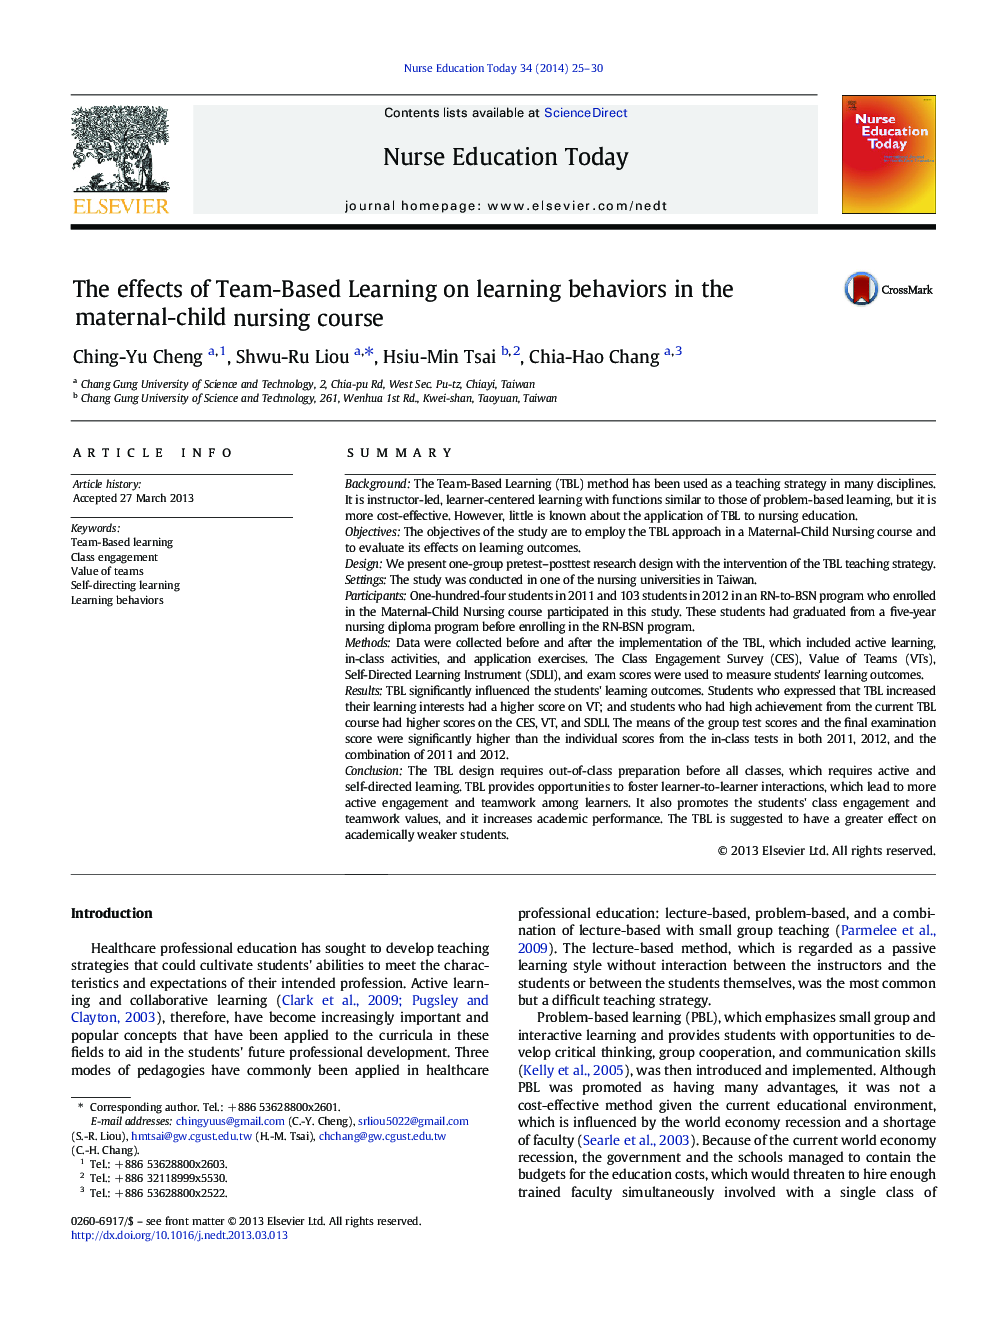 The effects of Team-Based Learning on learning behaviors in the maternal-child nursing course